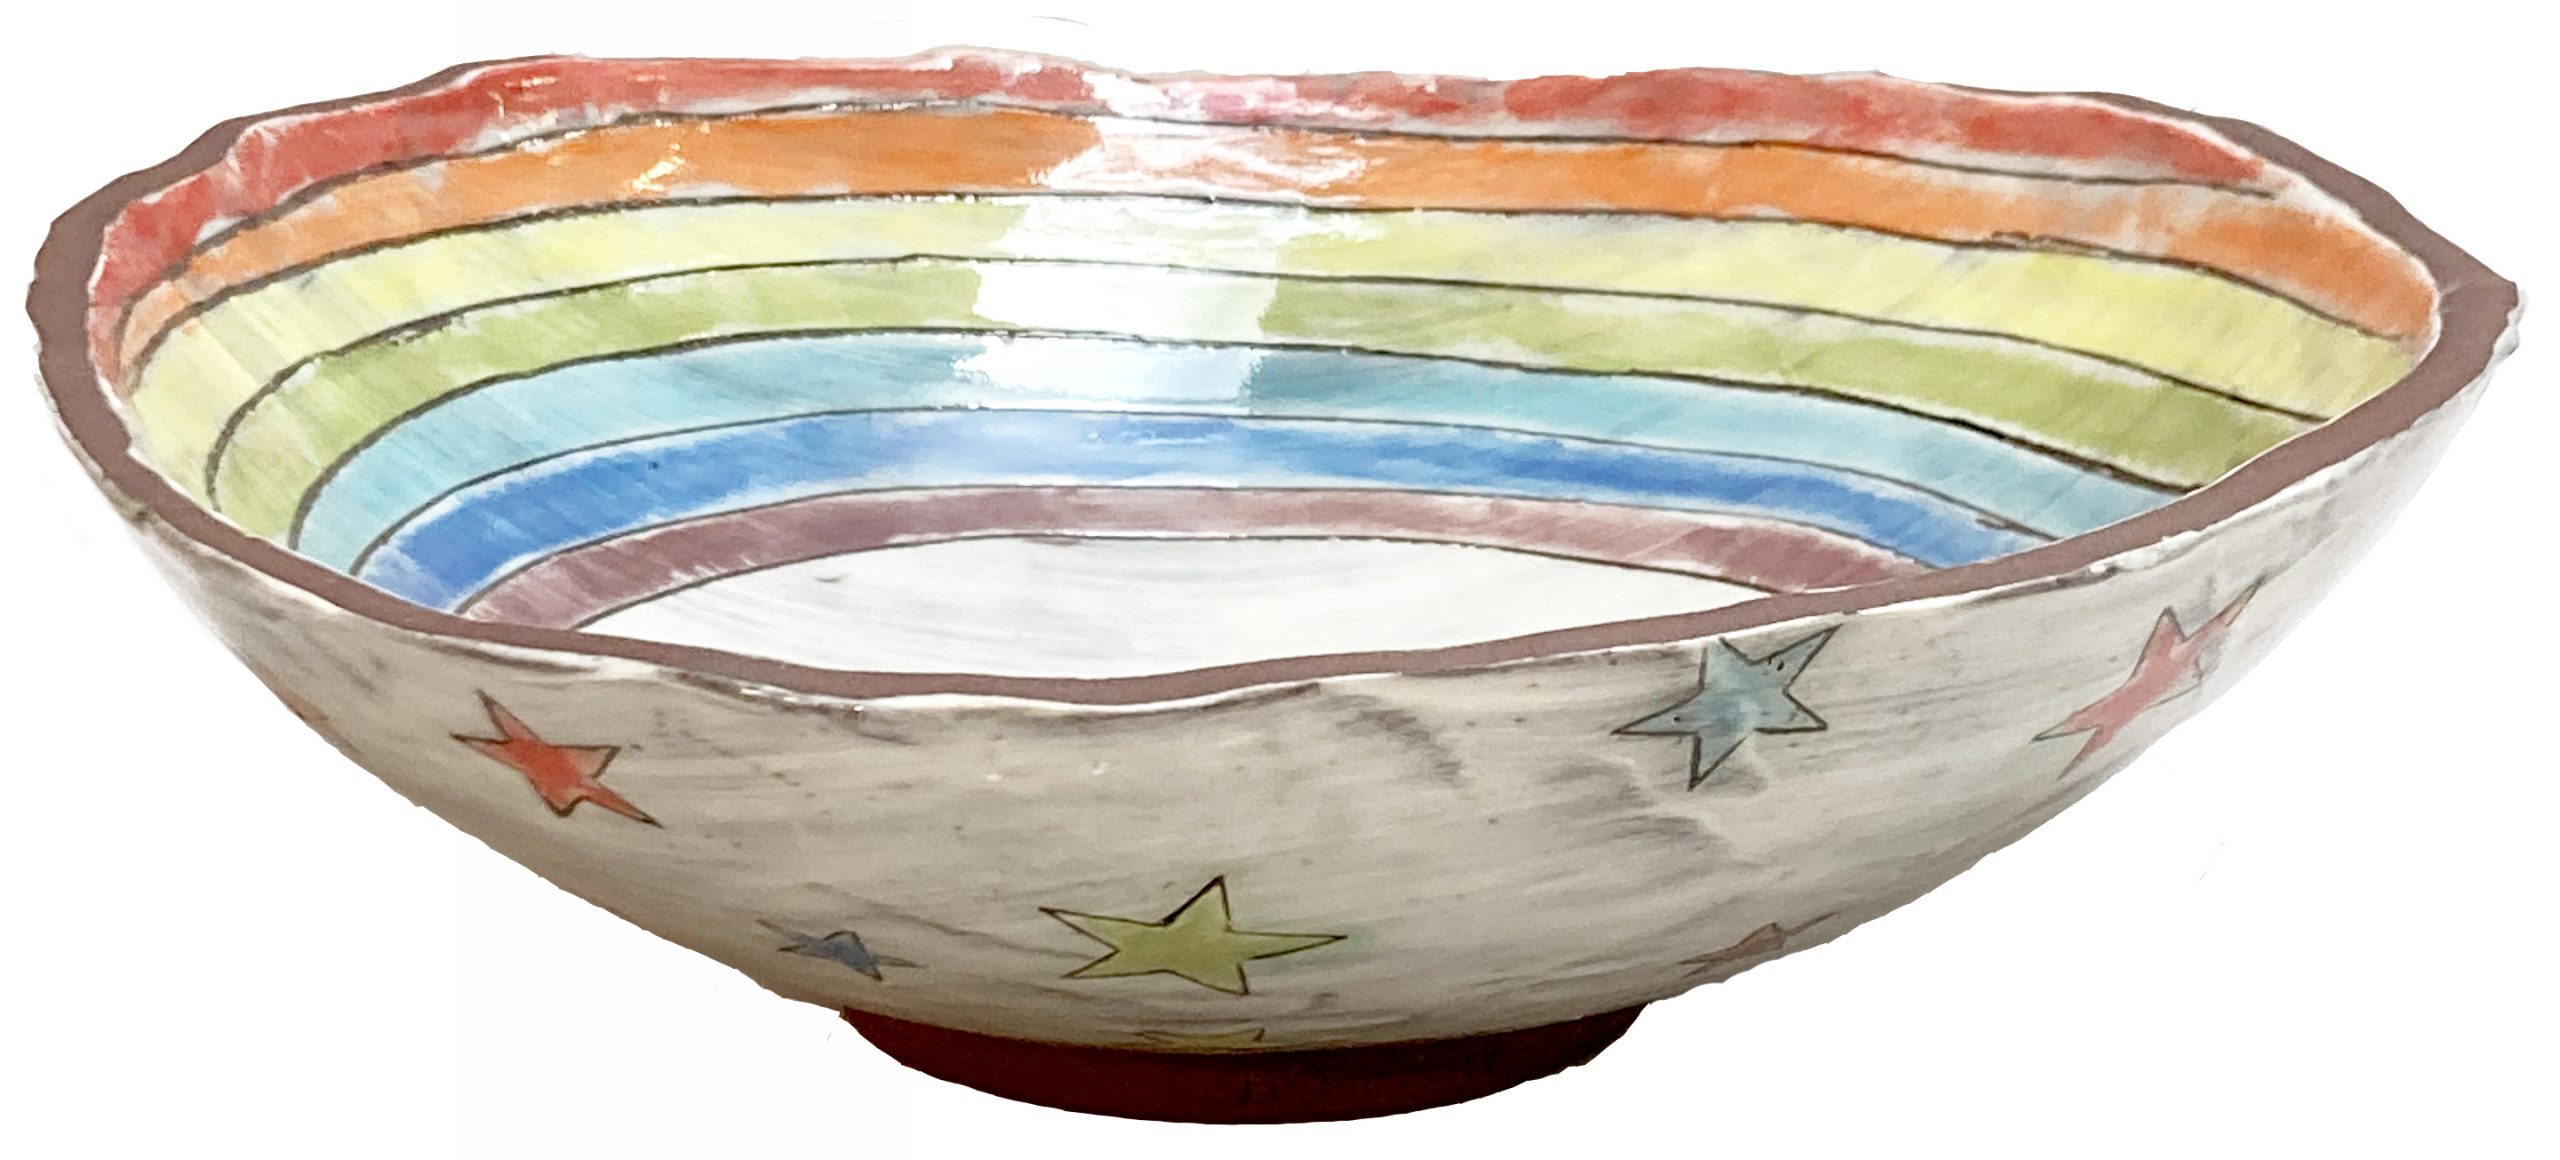 example of serving bowl